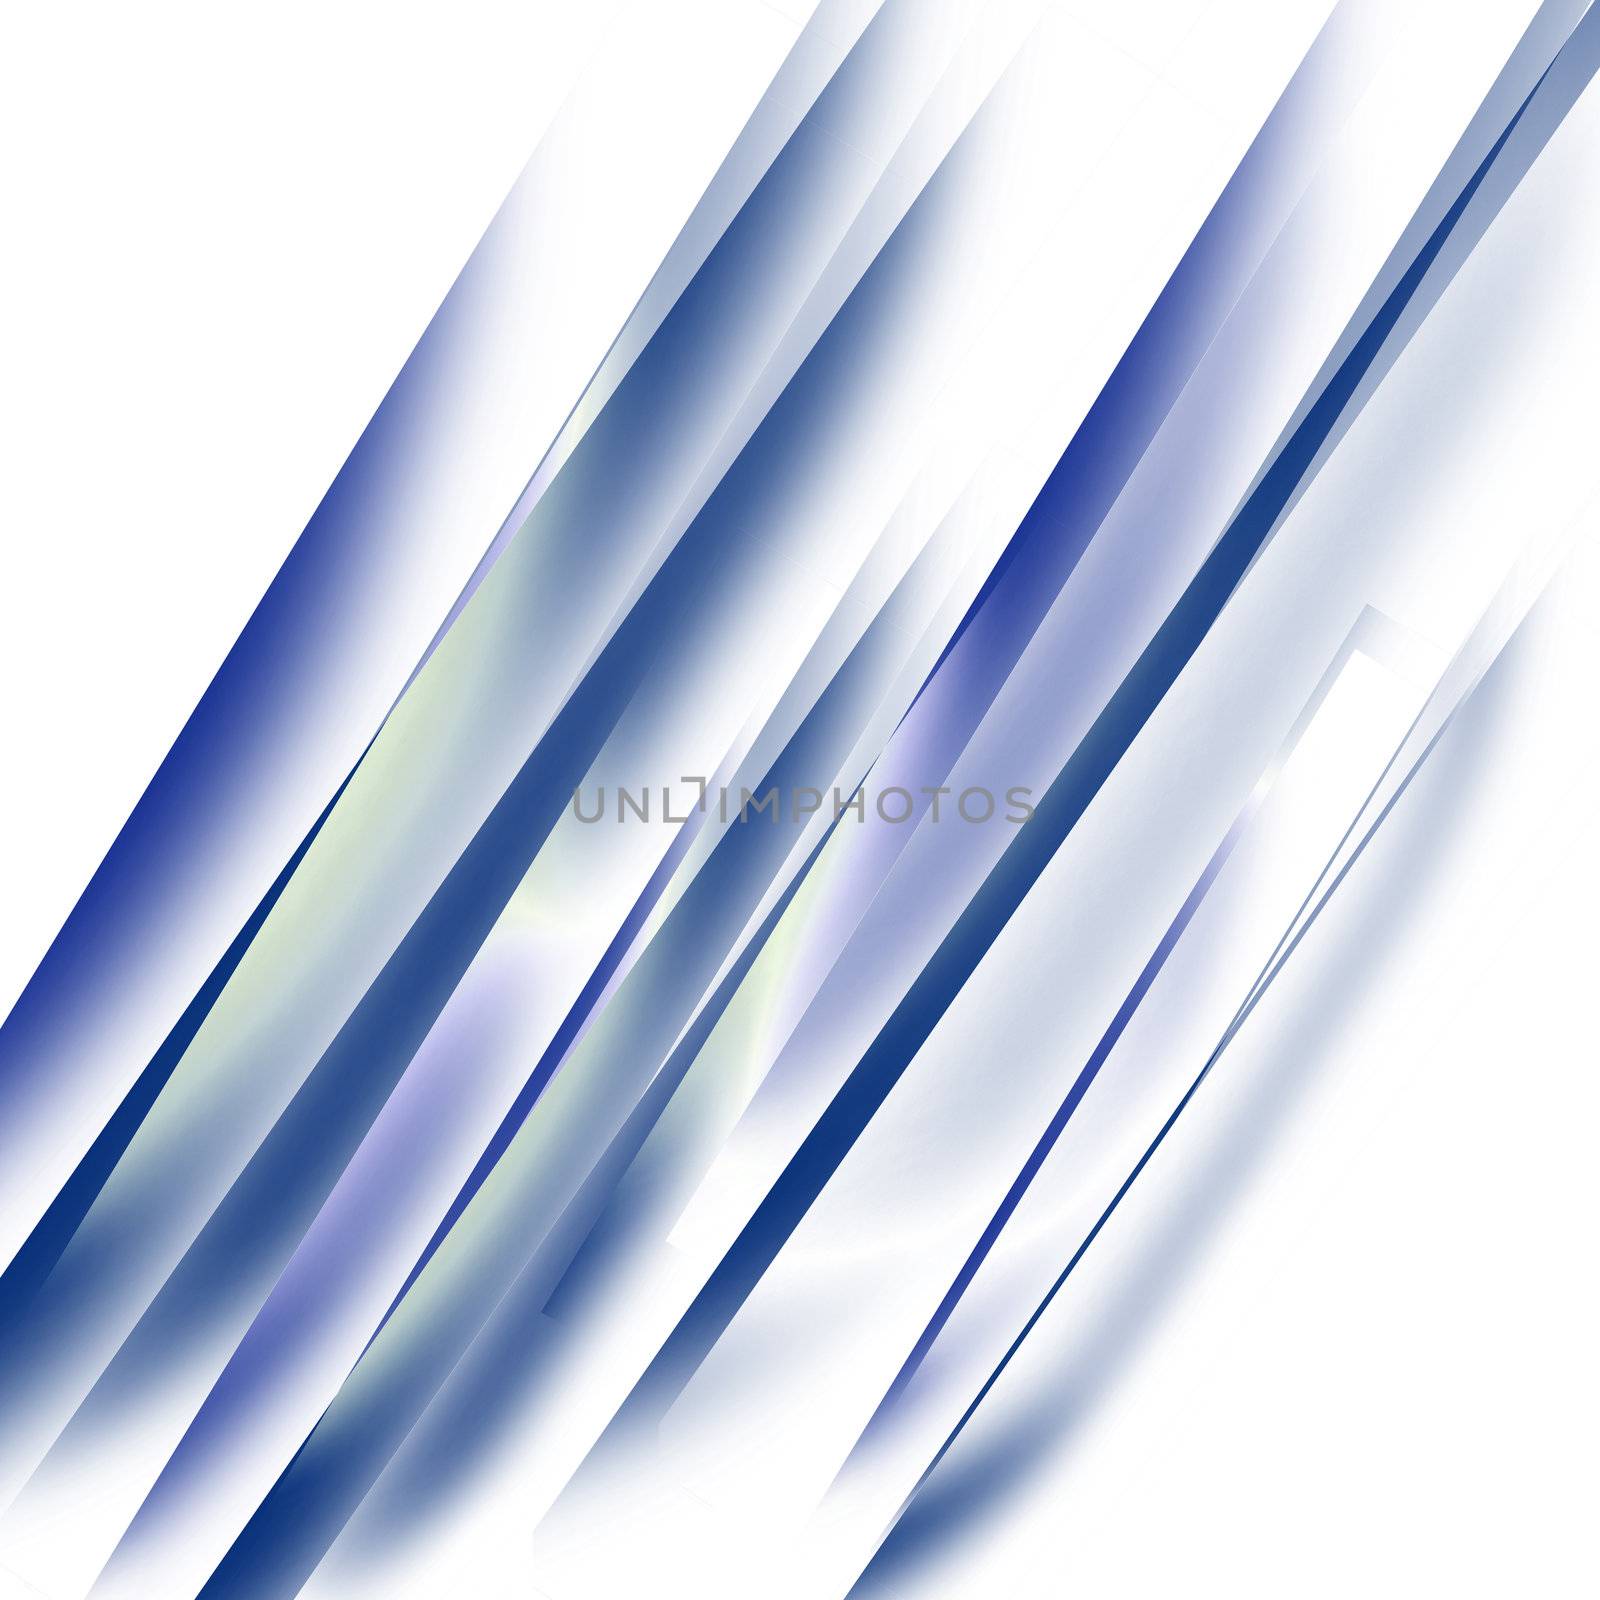 Straight blue lines in a downward angle against a white background